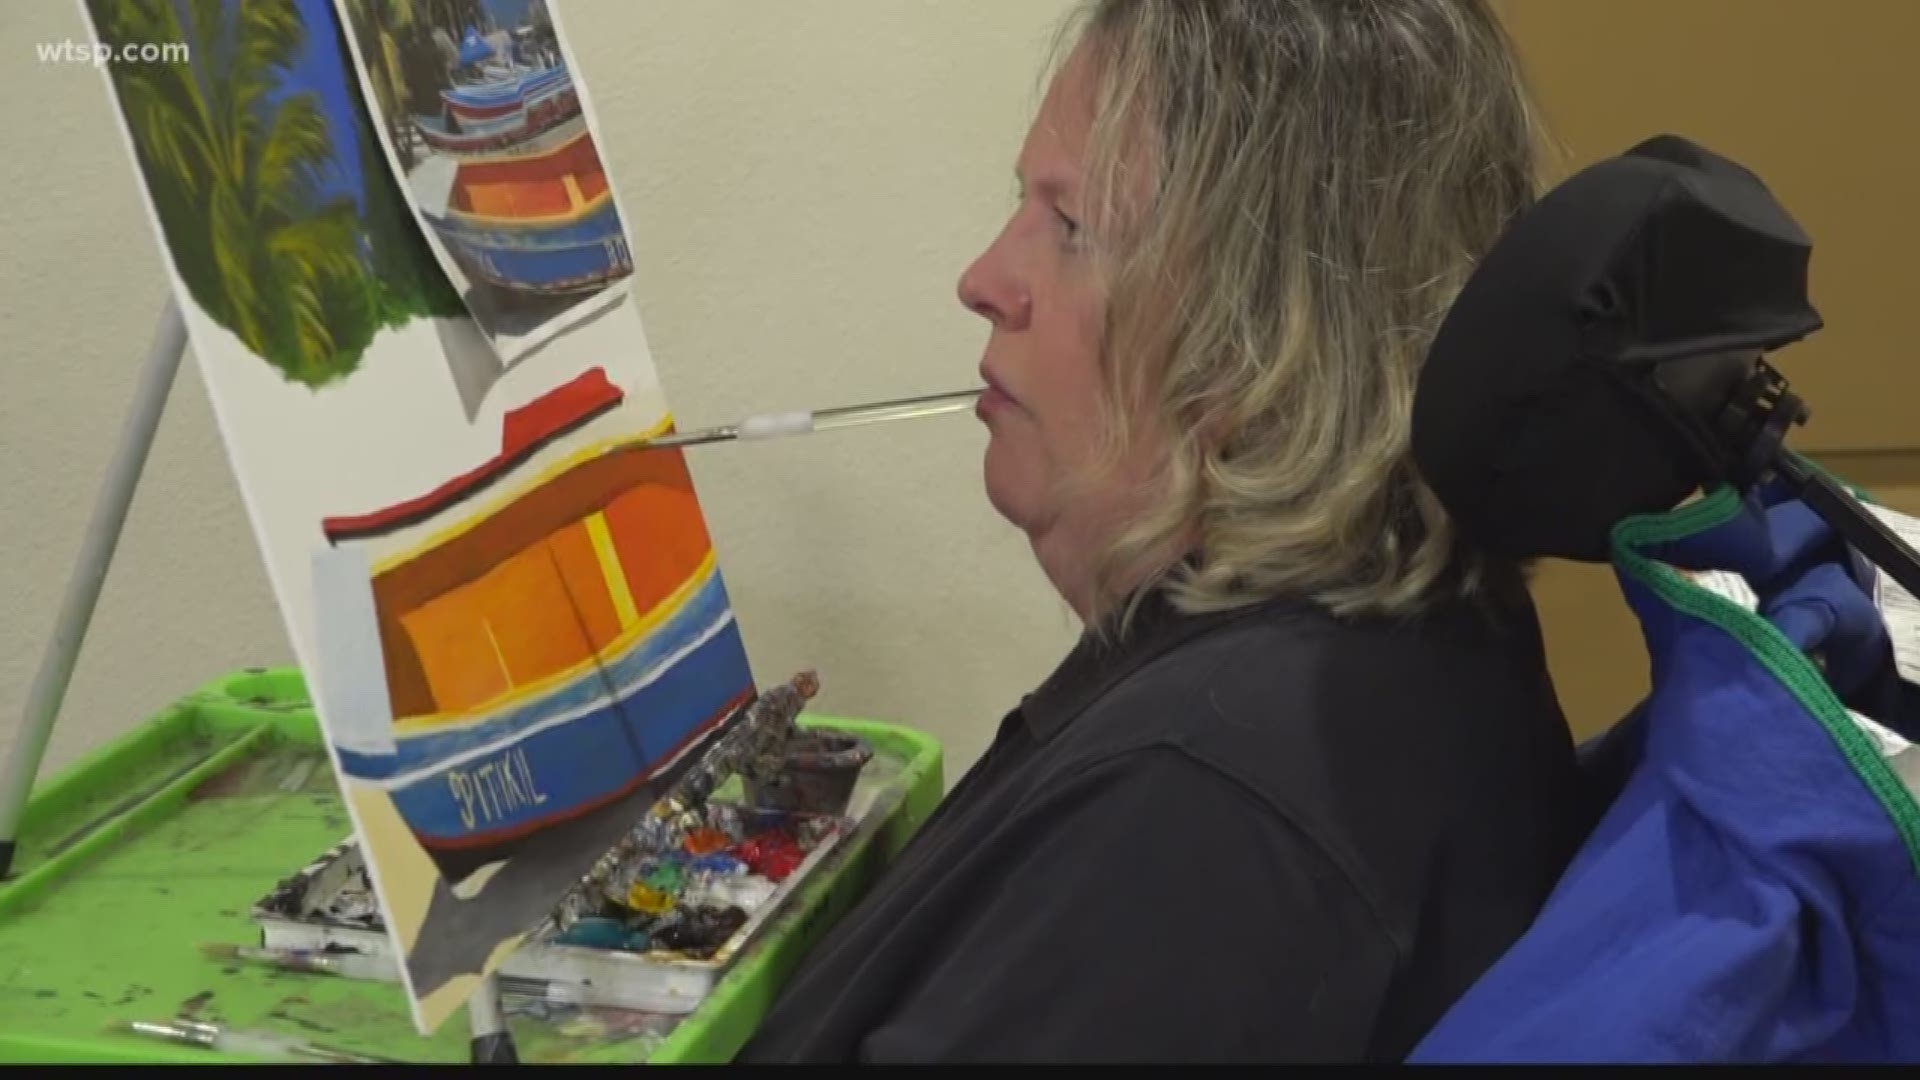 Sara May has been painting with her mouth since 2013. https://bit.ly/2sDF5dY